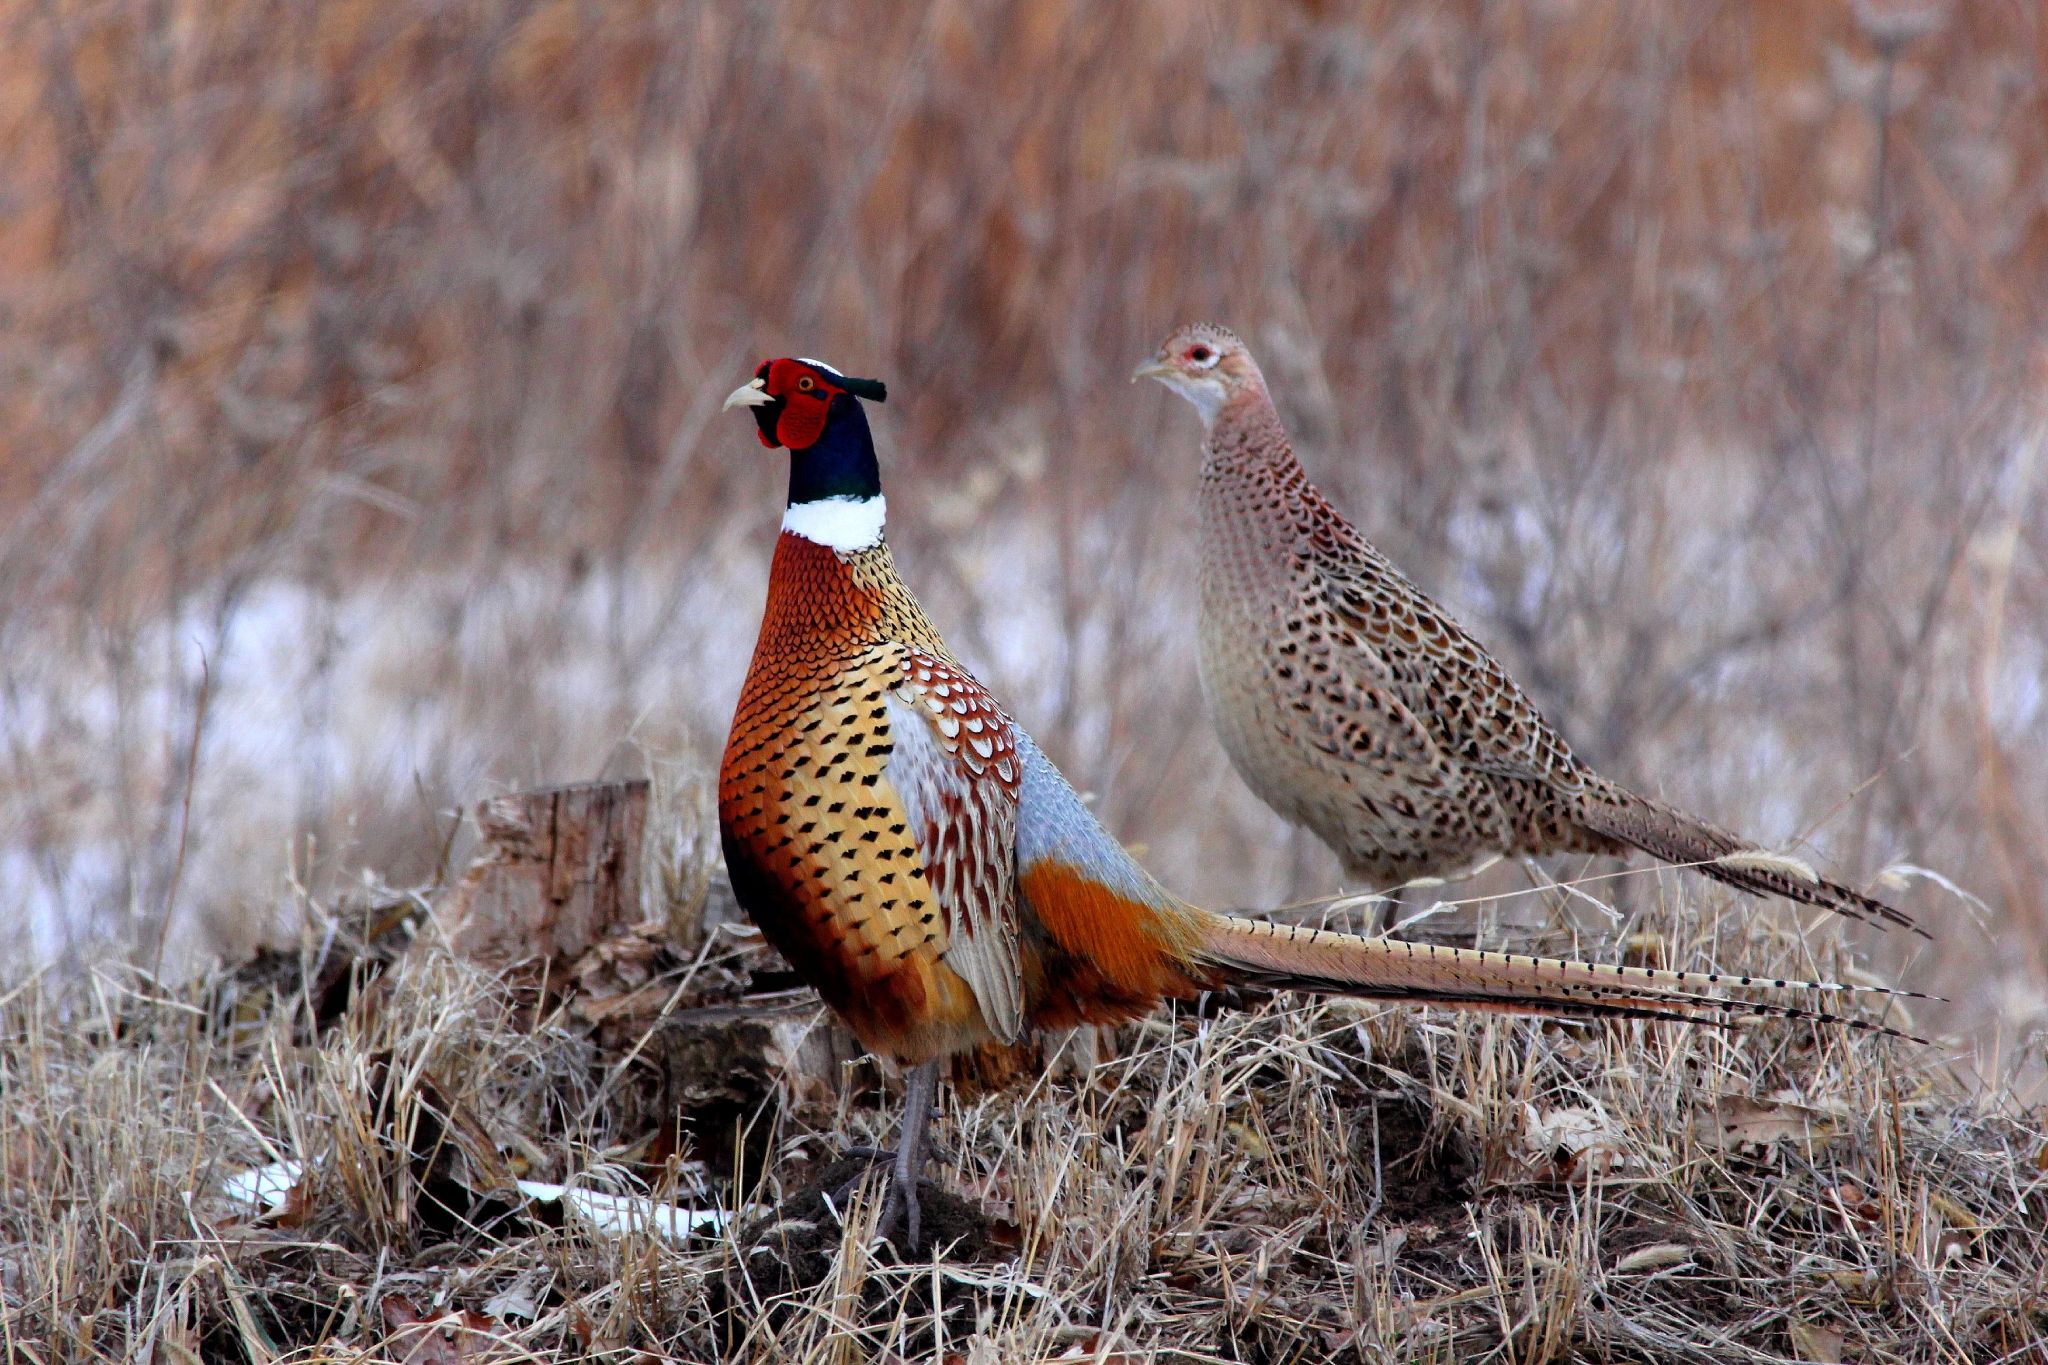 A closeup of two pheasants, one orange and yellow, the other tan and brown, perched on brown brush with snow in the background.